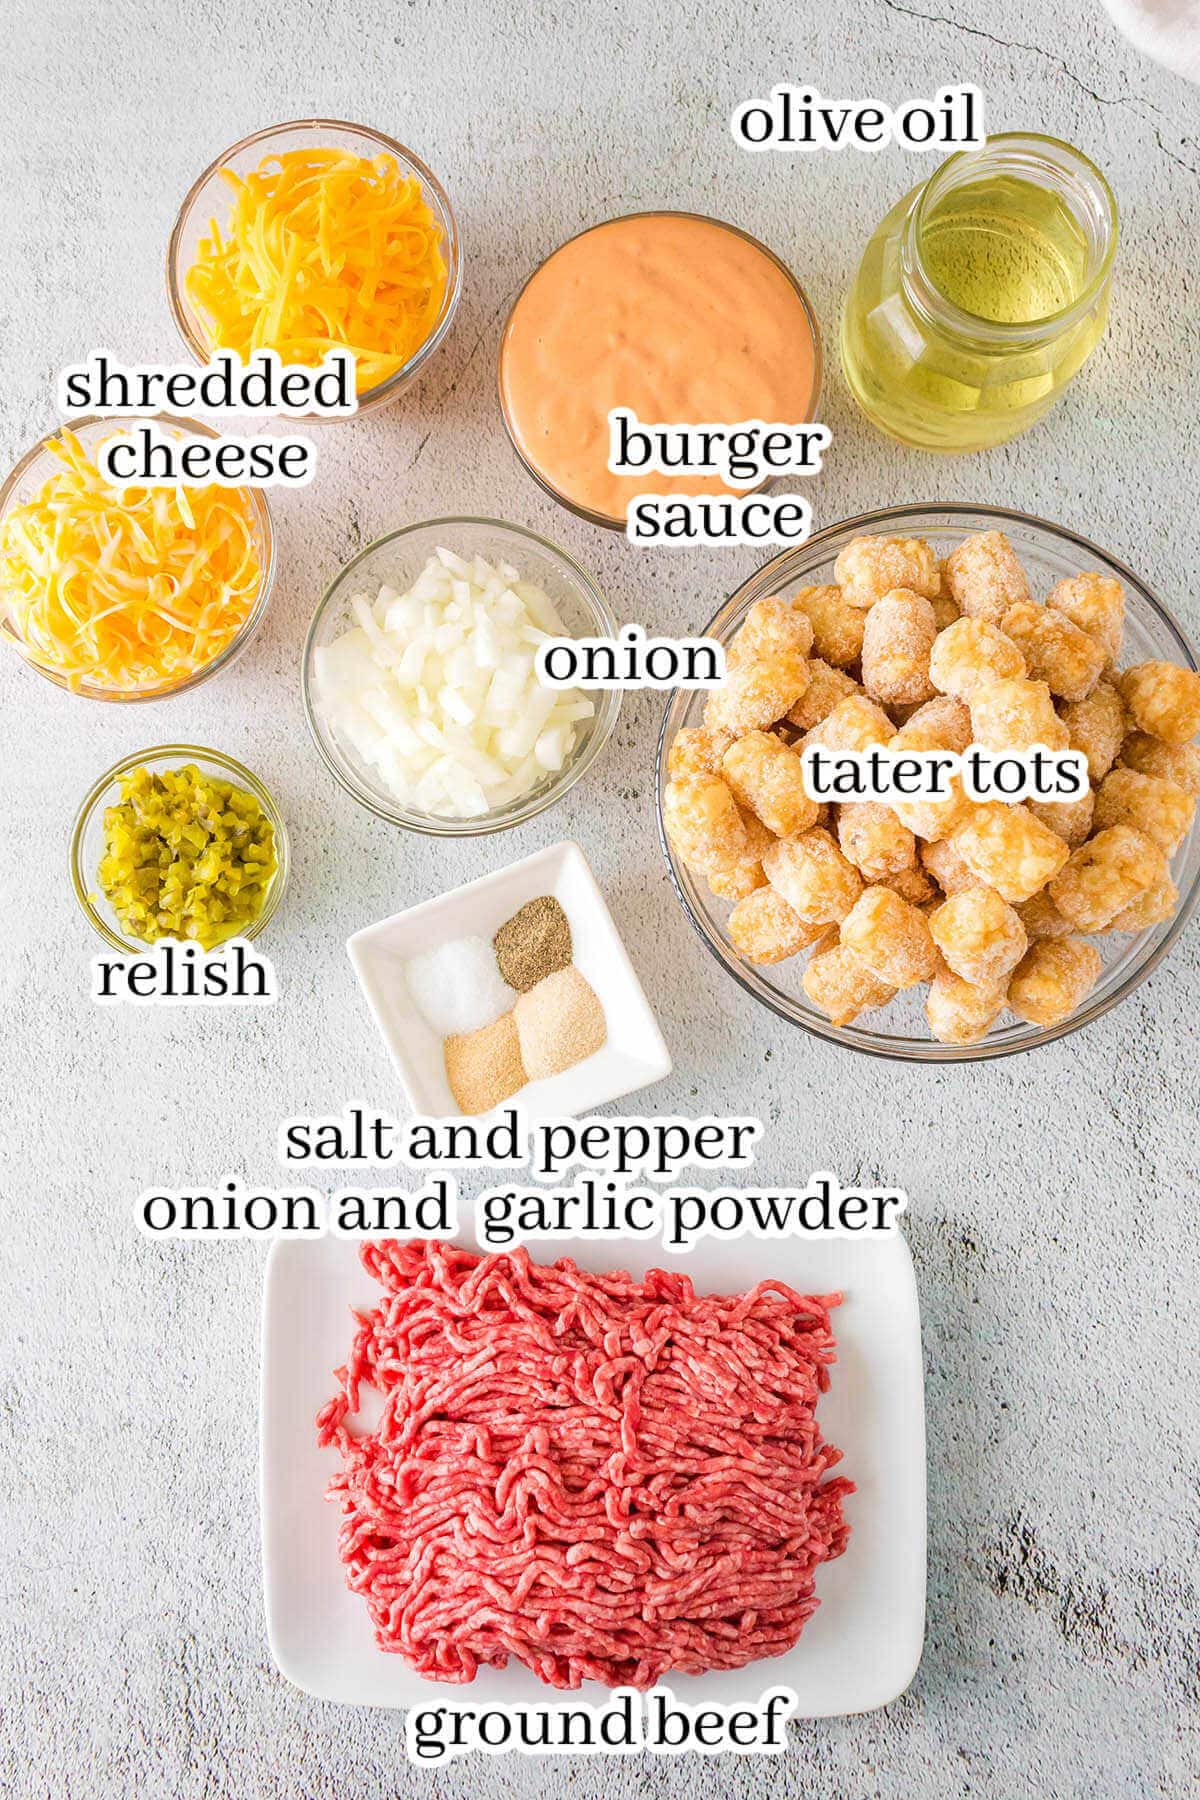 Ingredients to make casserole recipe, with print overlay.